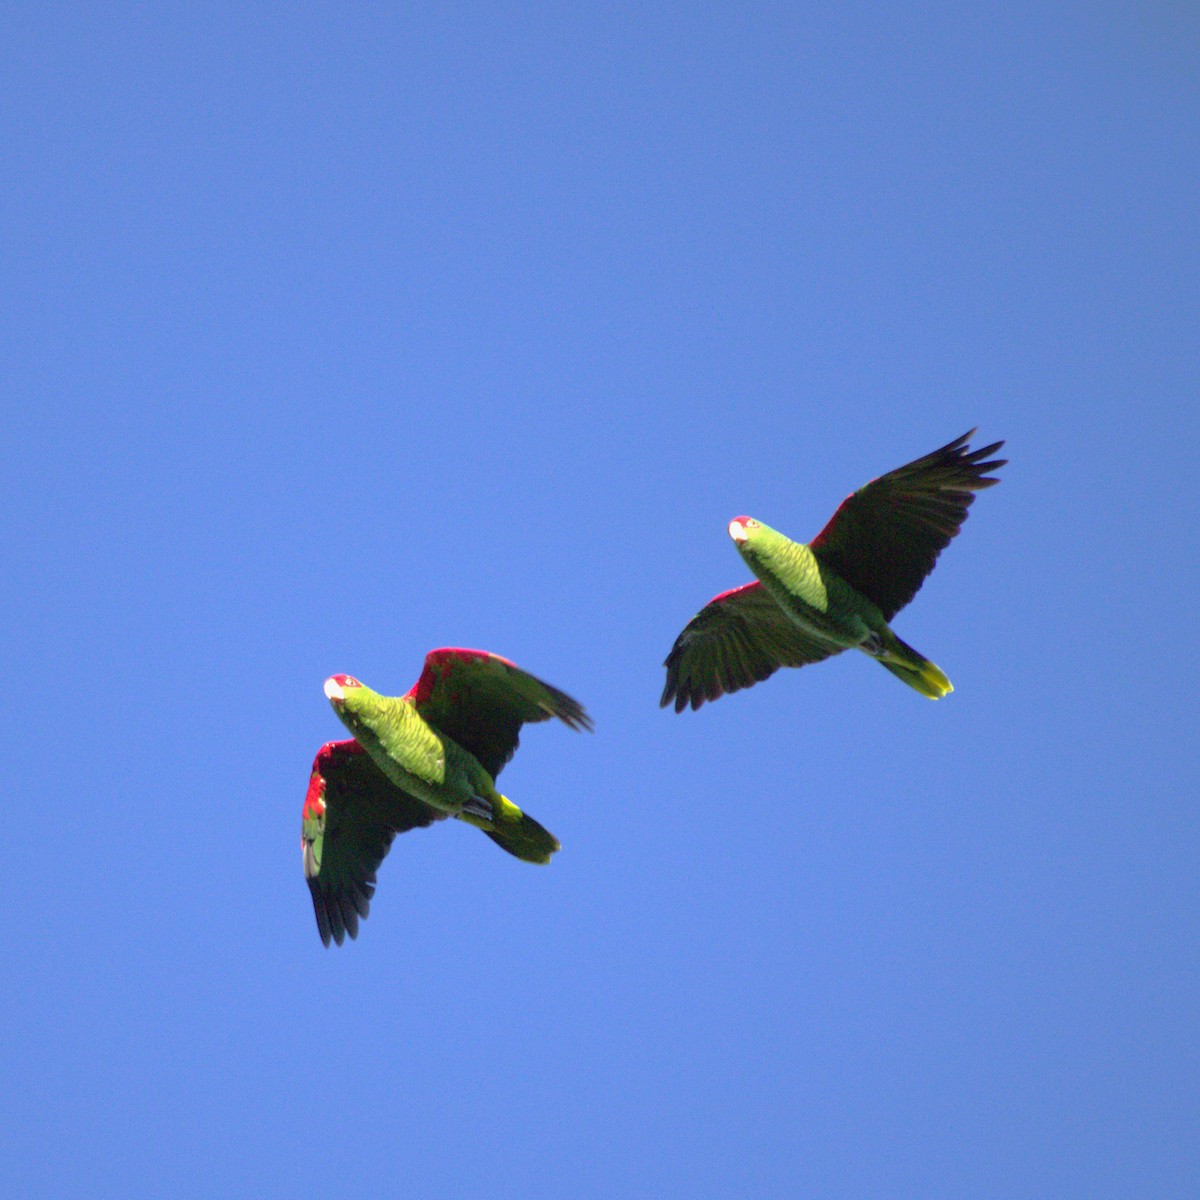 Red-spectacled Parrot - Josi Guimarães